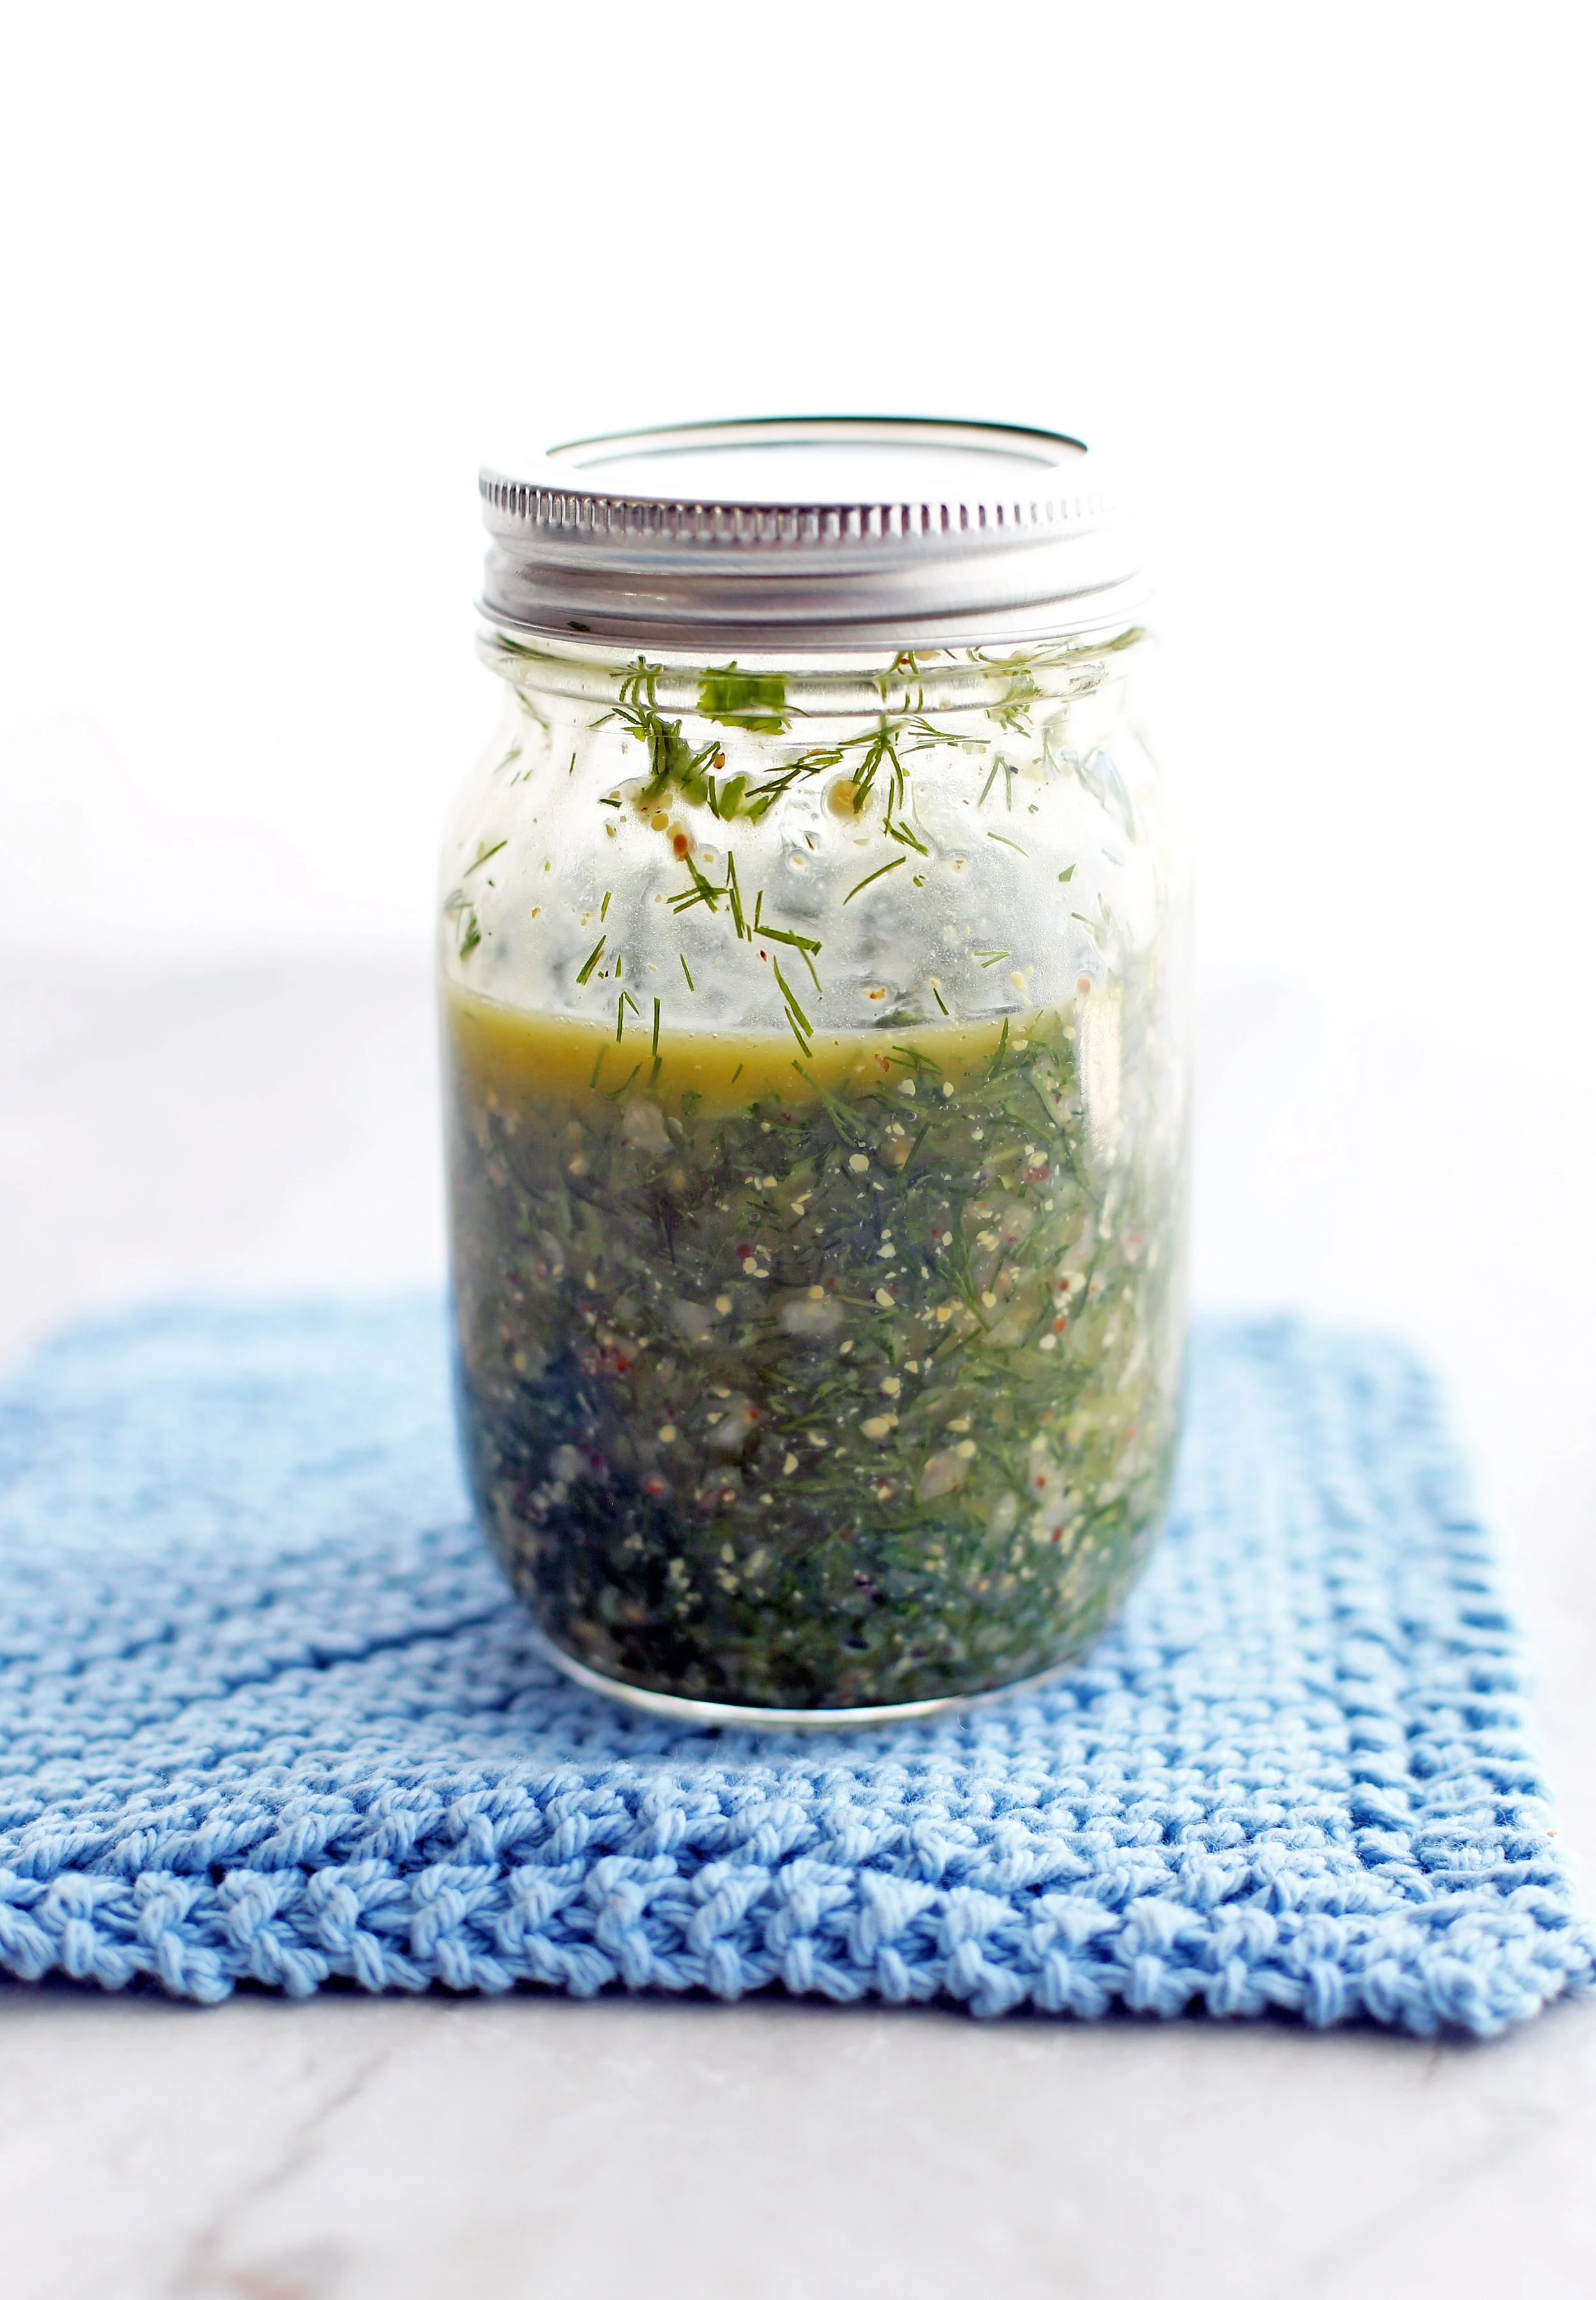 A mason jar containing olive oil, red wine vinegar, dill, parsley. garlic,dijon mustard, salt, and pepper shaken together to form a vinaigrette.